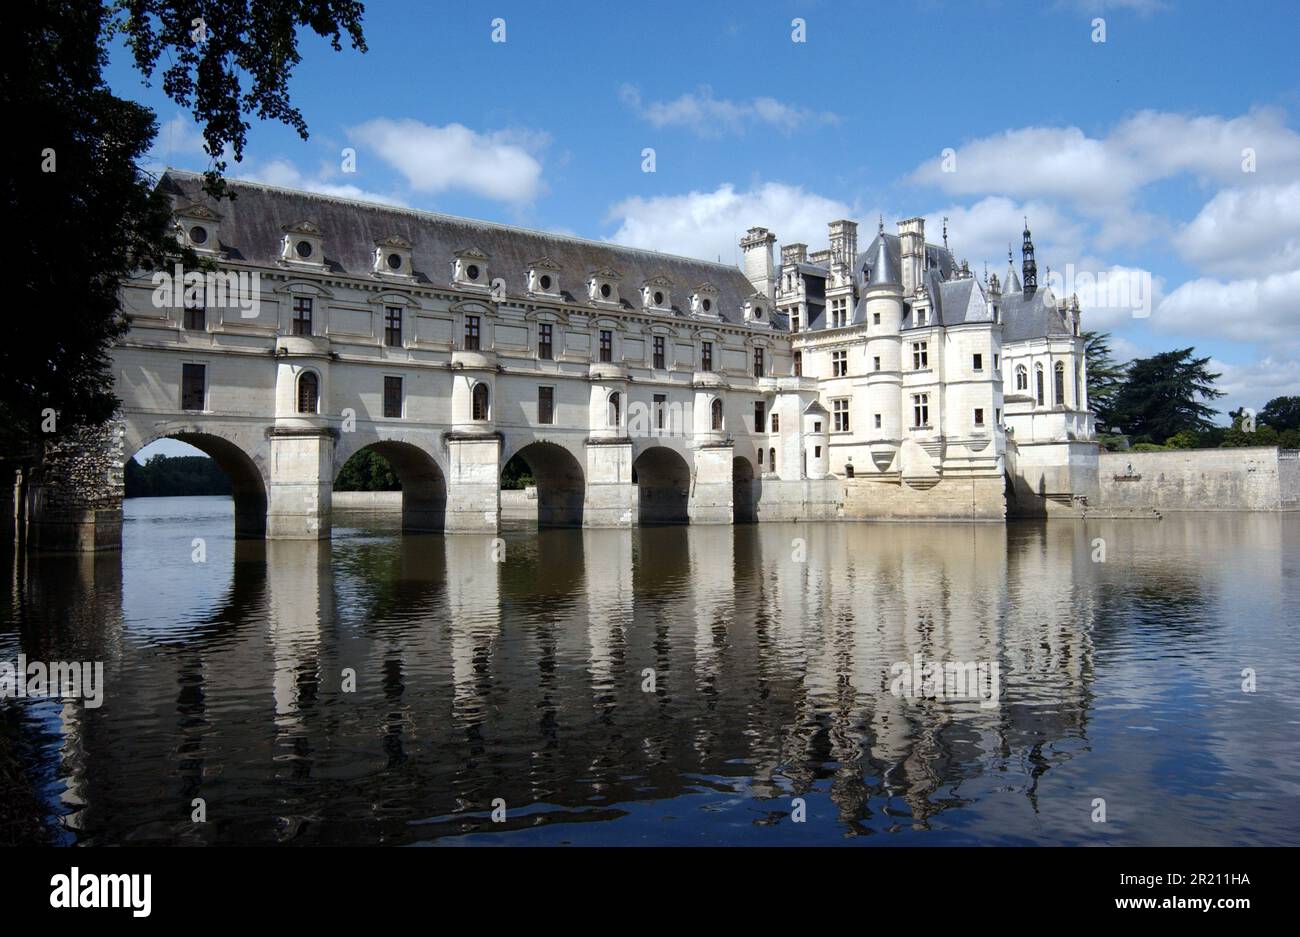 Photograph showing the exterior of Chateau de Chenonceau, a French chateau spanning the River Cher. Stock Photo